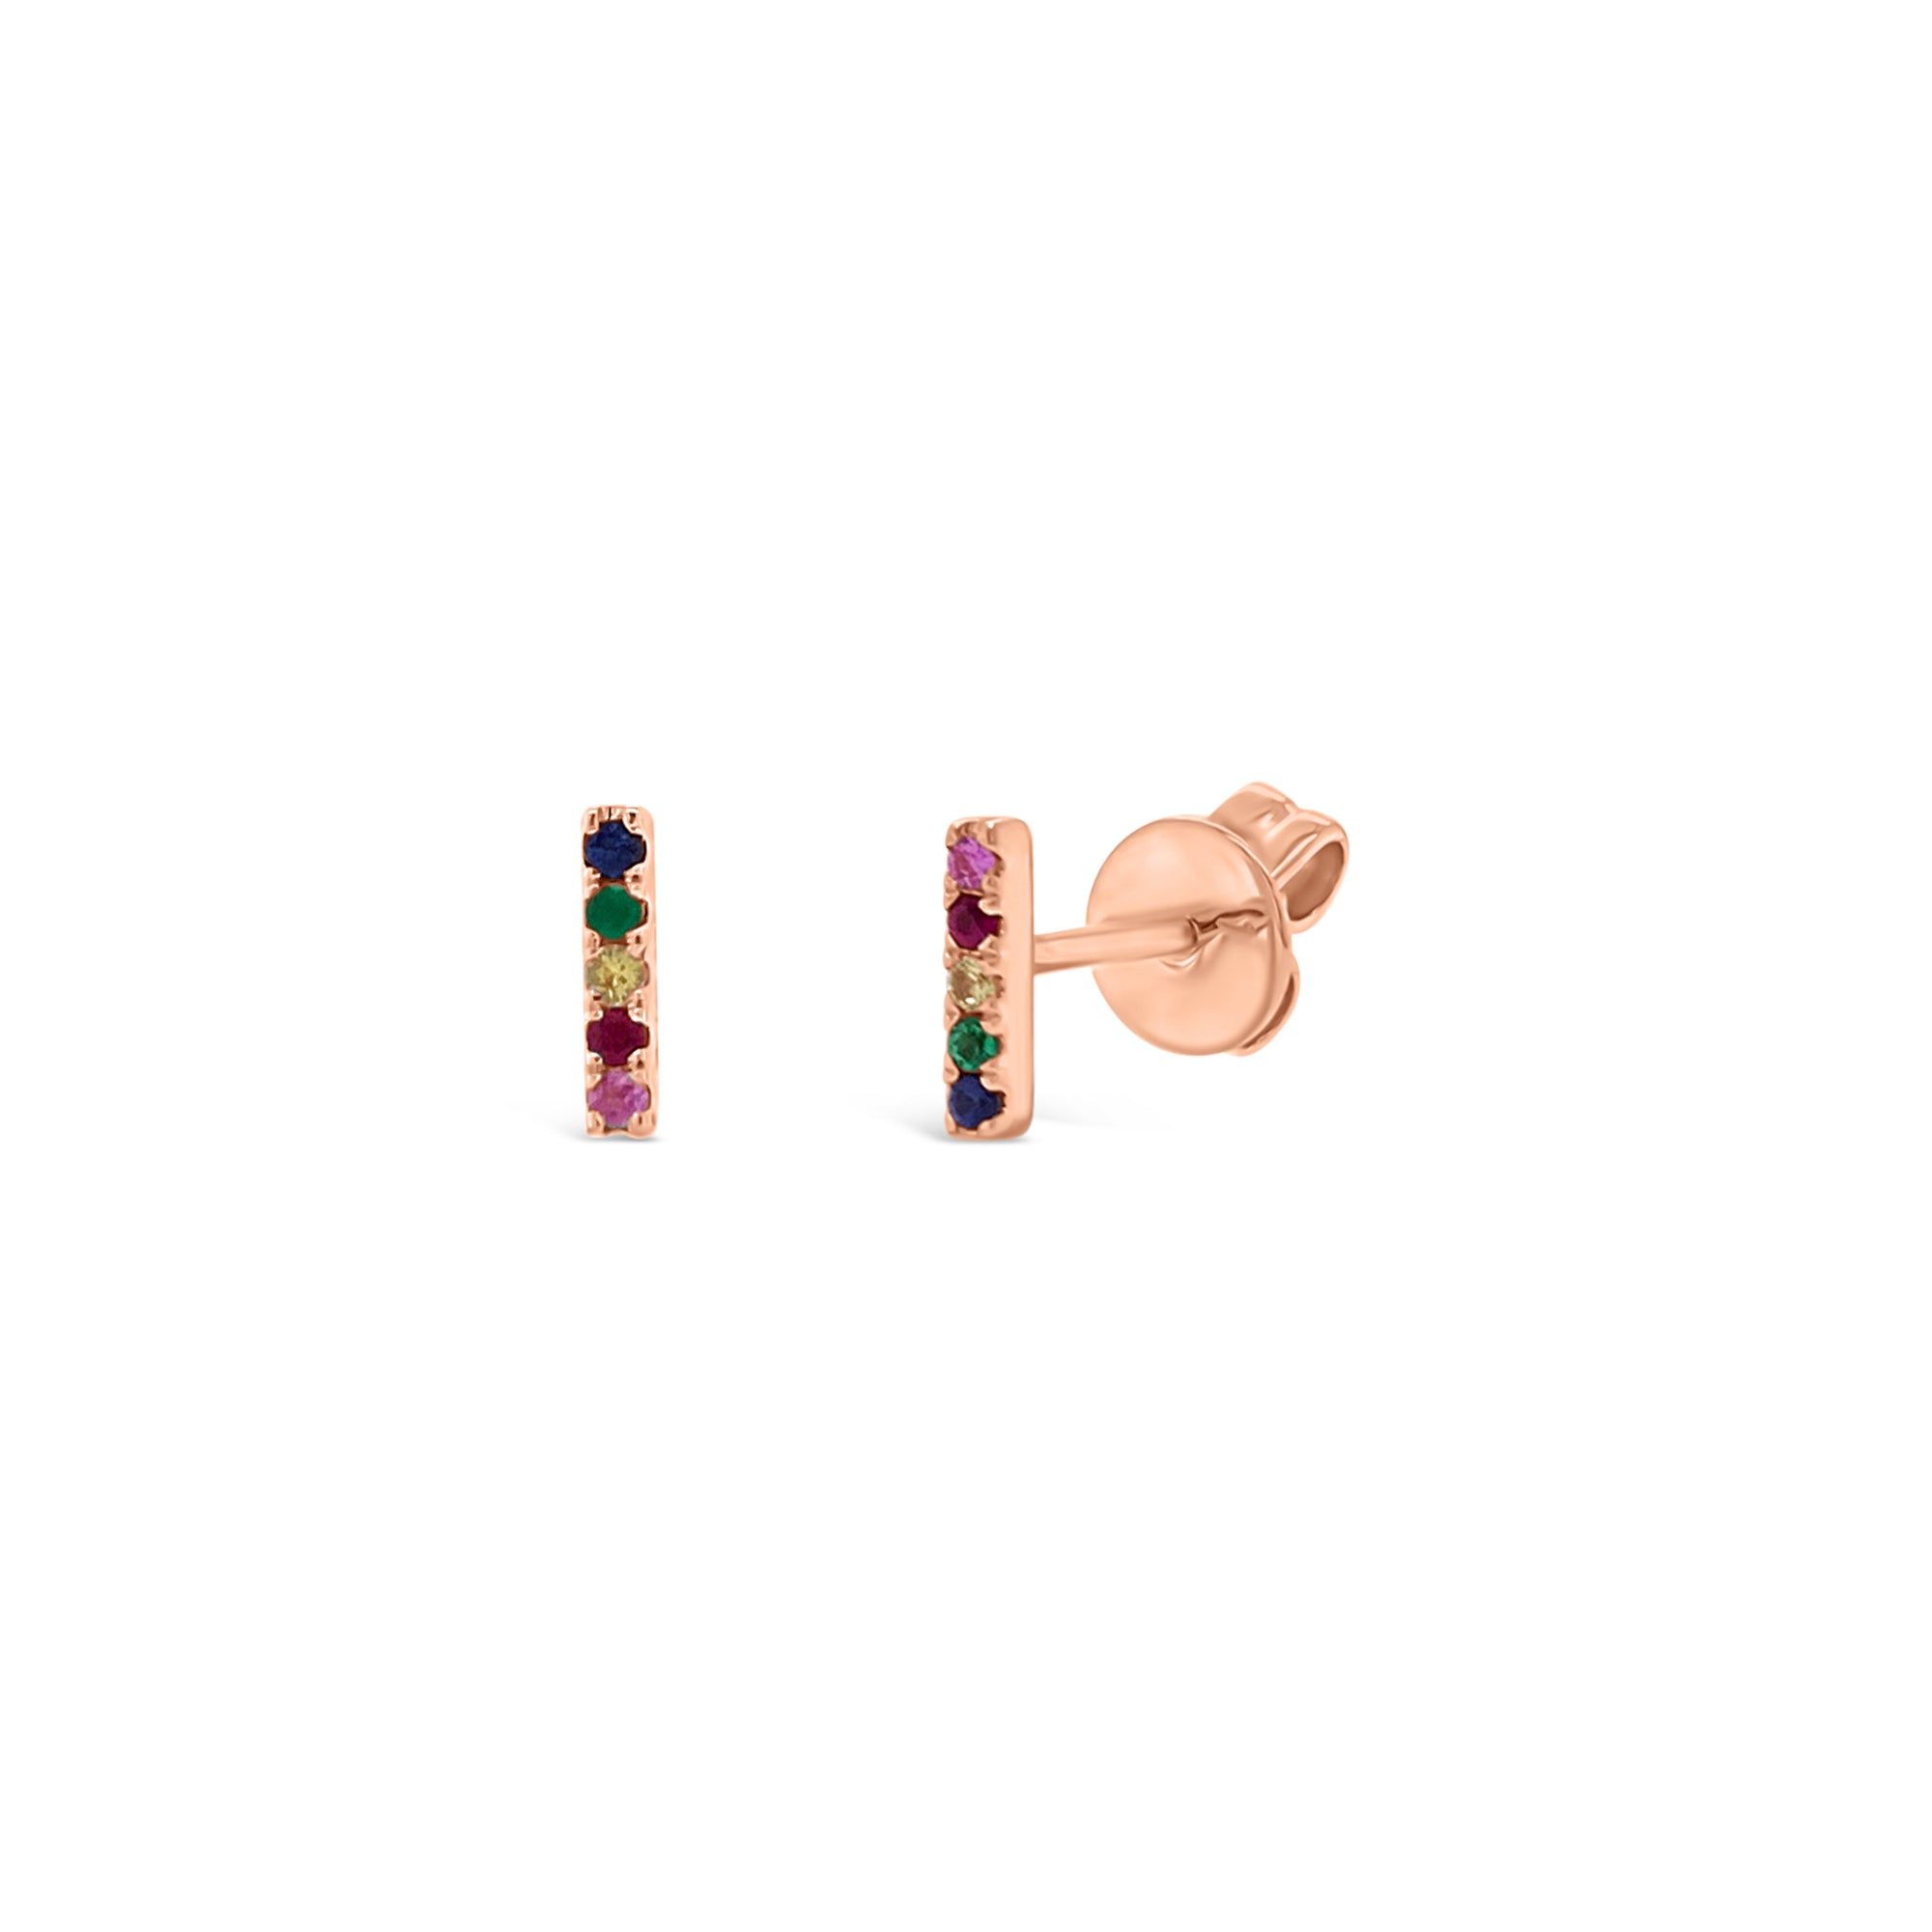 Rainbow Bar Earrings - 0.07 total carat weight. Available in yellow, white, and rose gold.